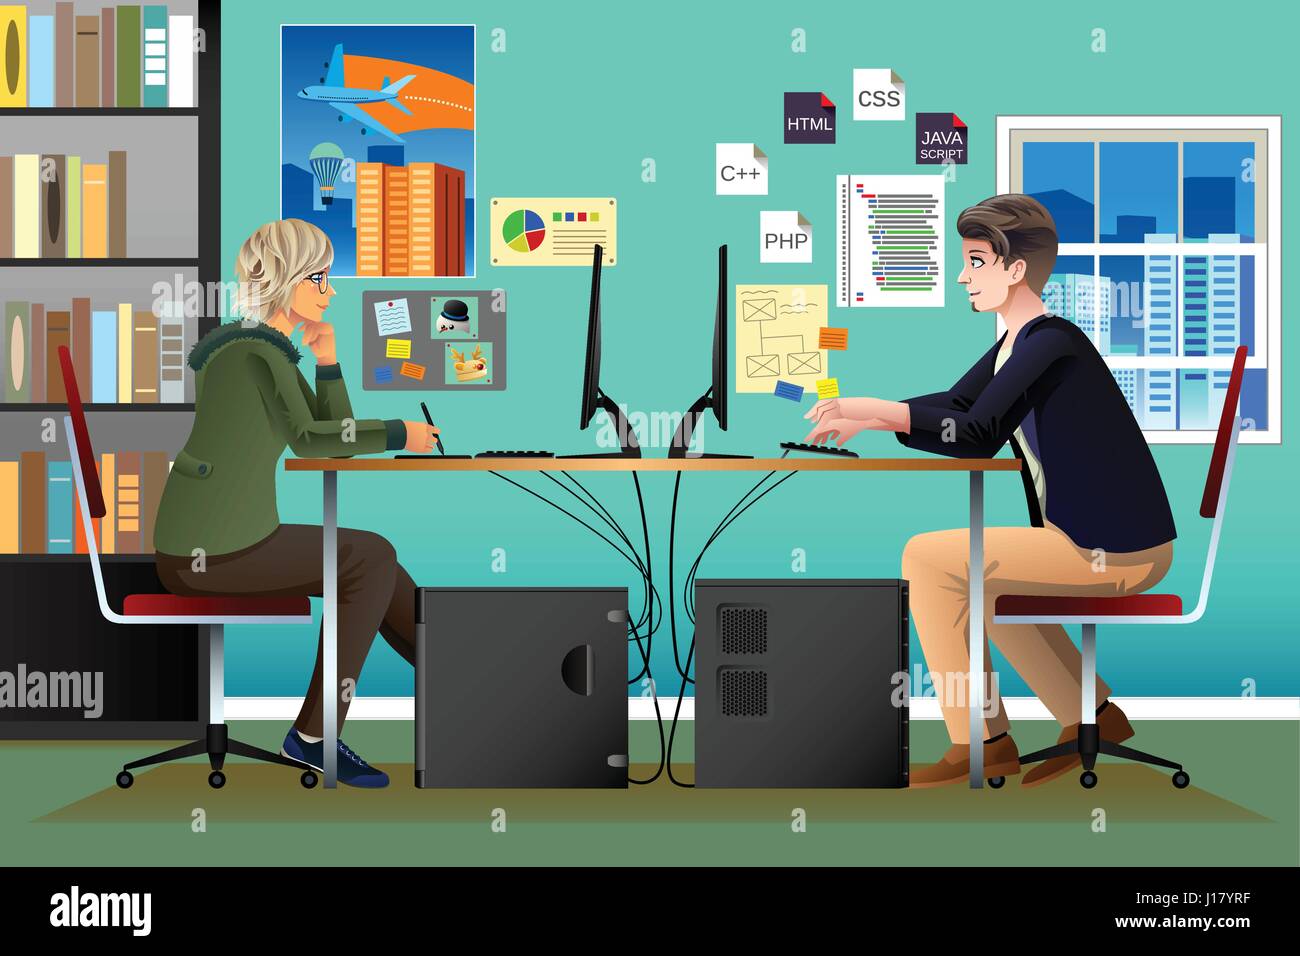 A vector illustration of Programmer and Designer Working in an Office Stock Vector